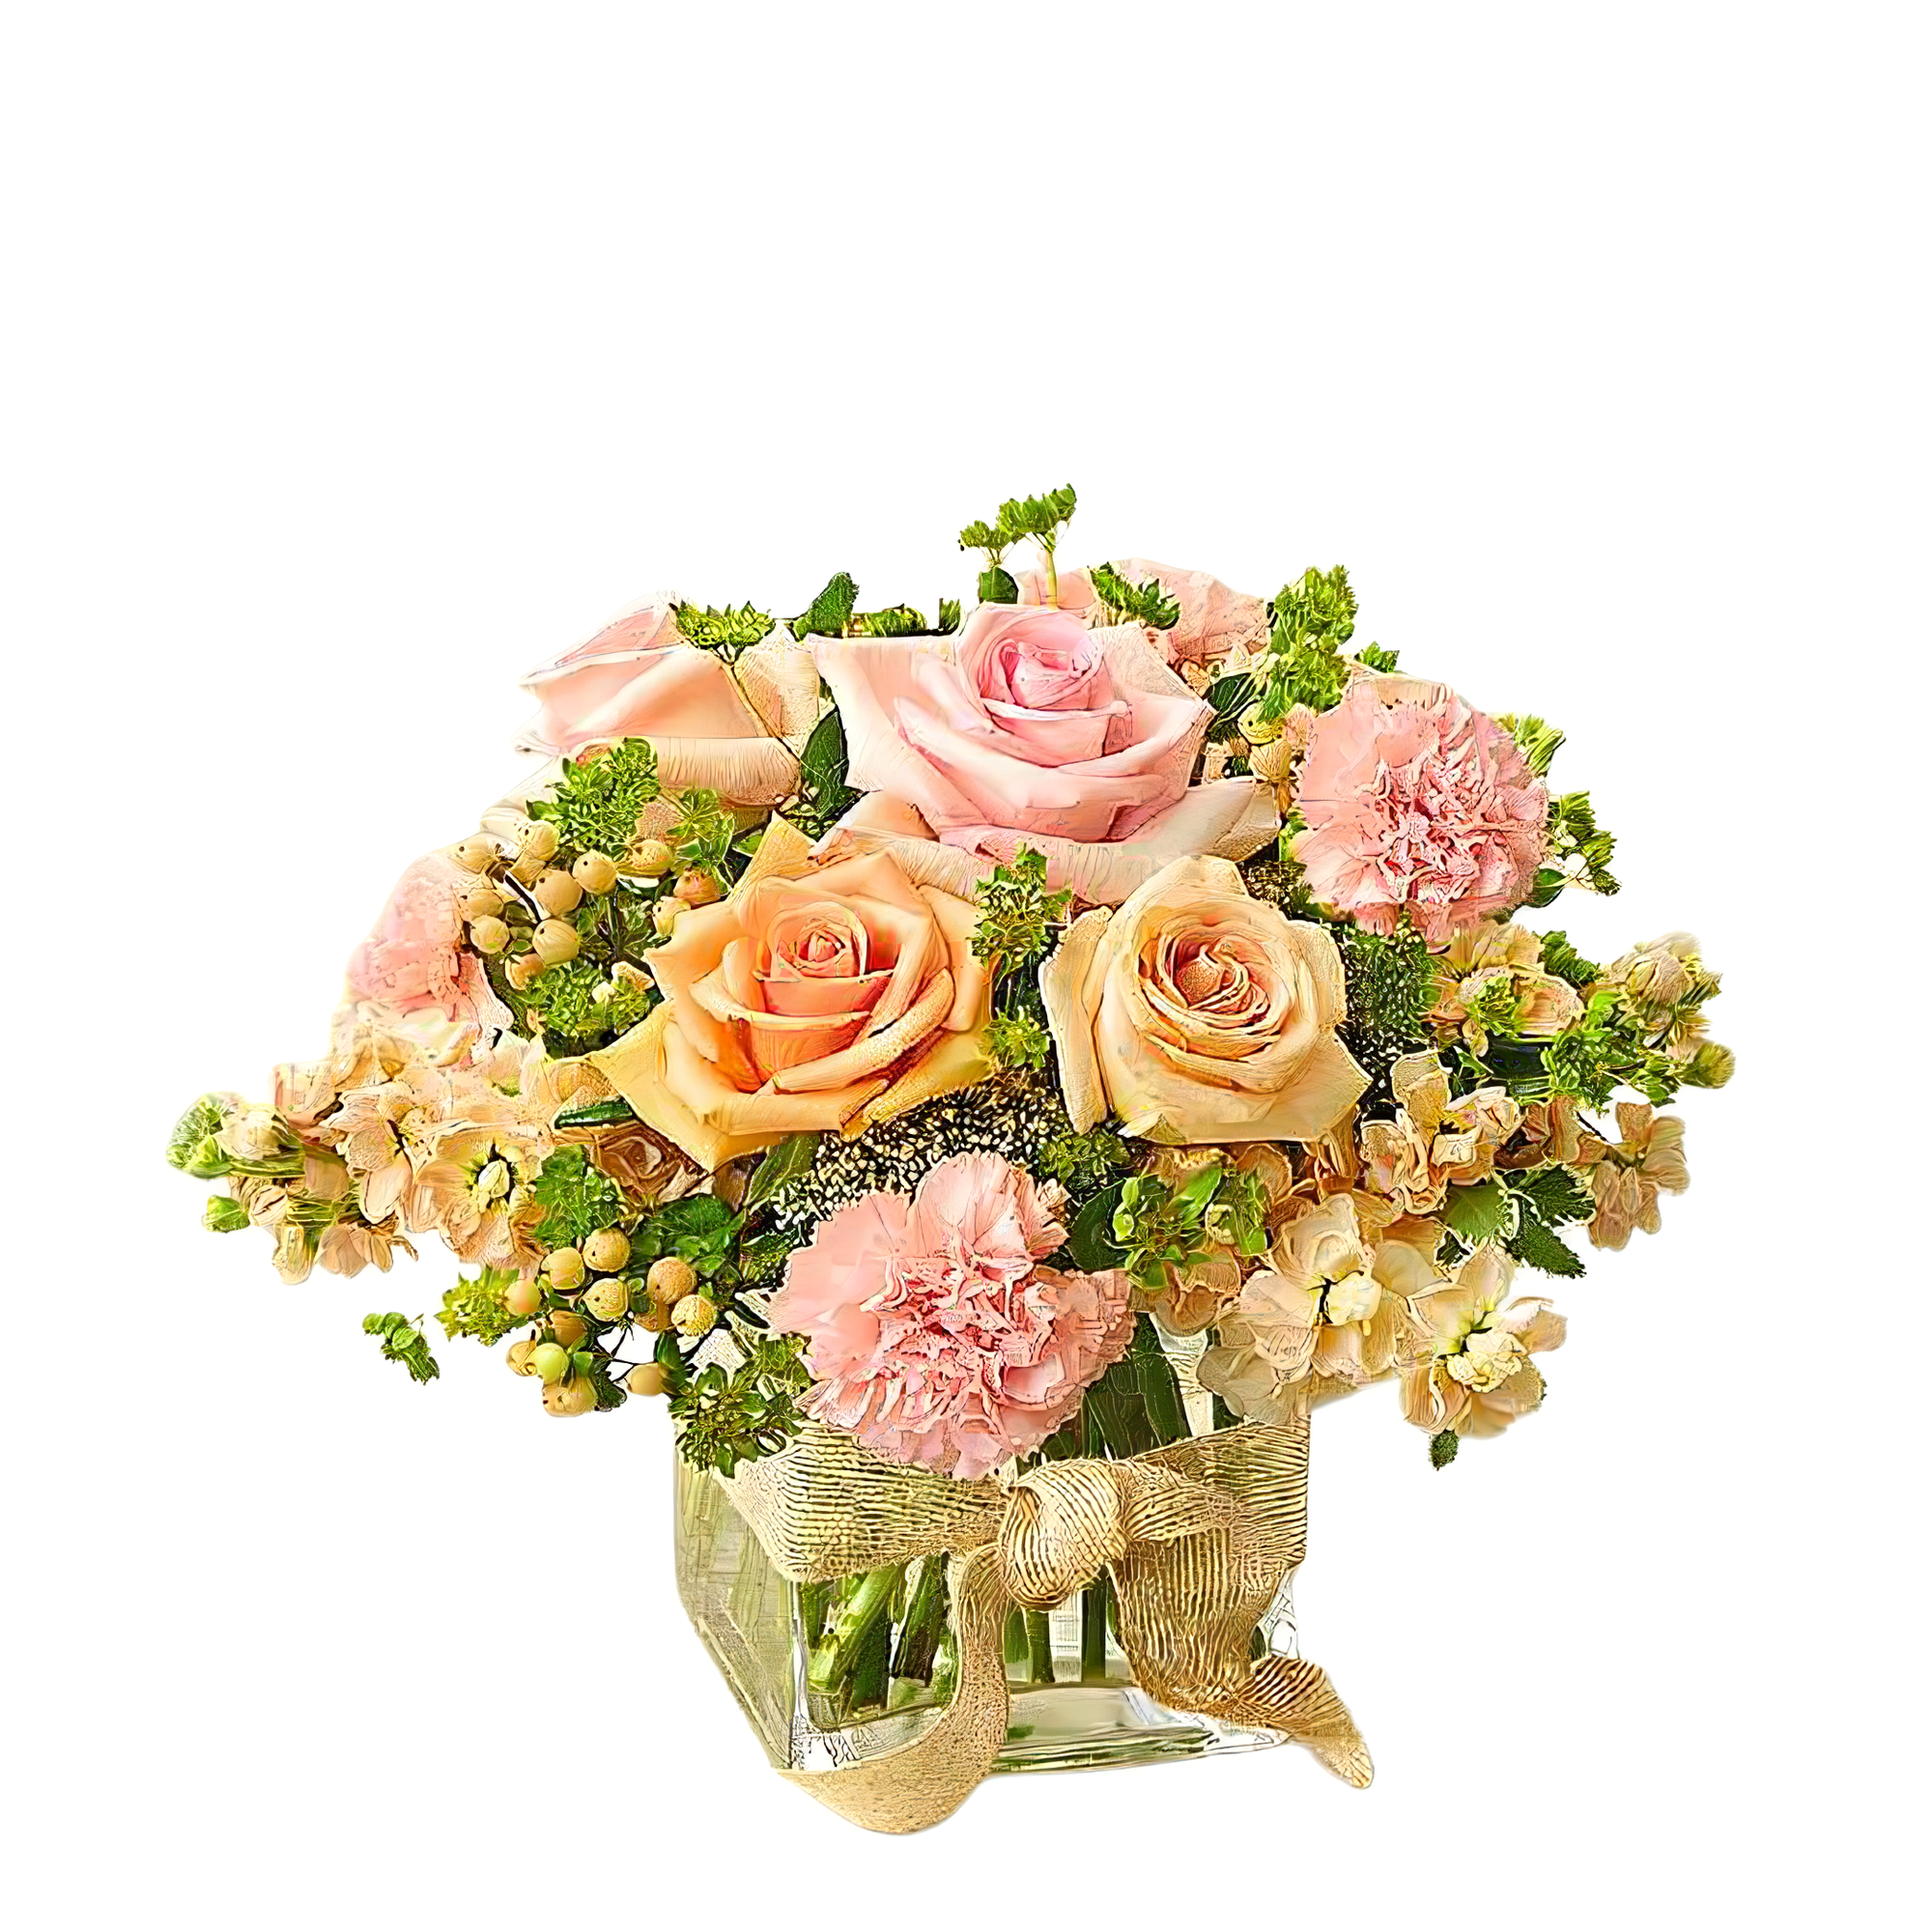 Manhattan Flower Delivery - It's All About You - Everyday Collection